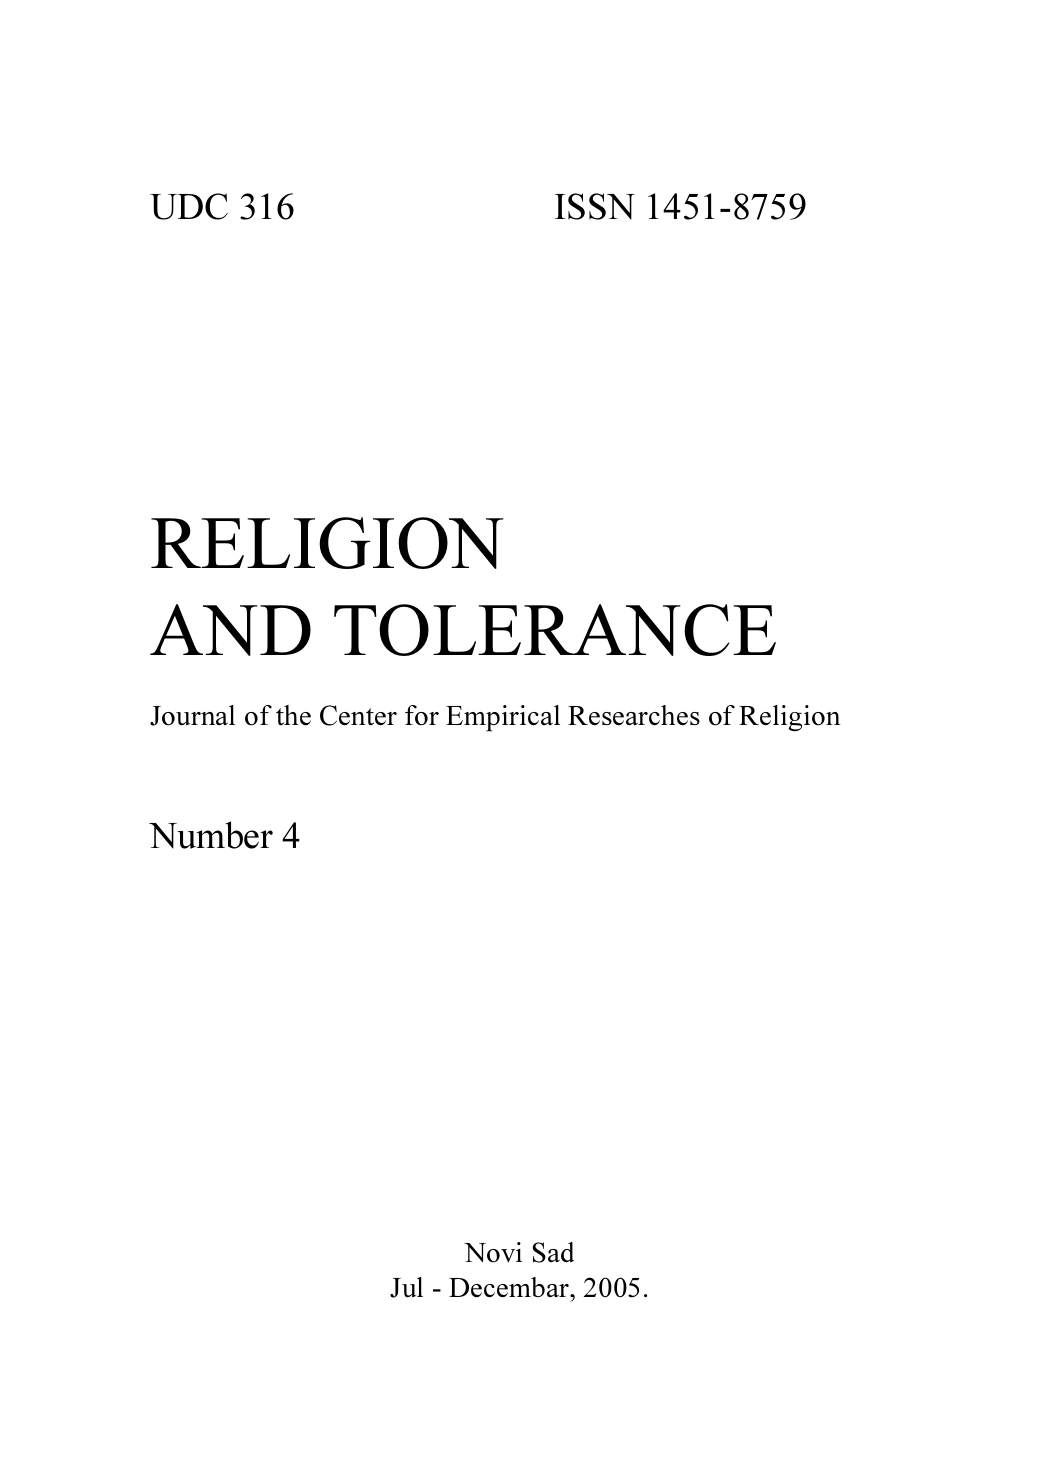 RELIGION EQUAL TOLERANCE Cover Image